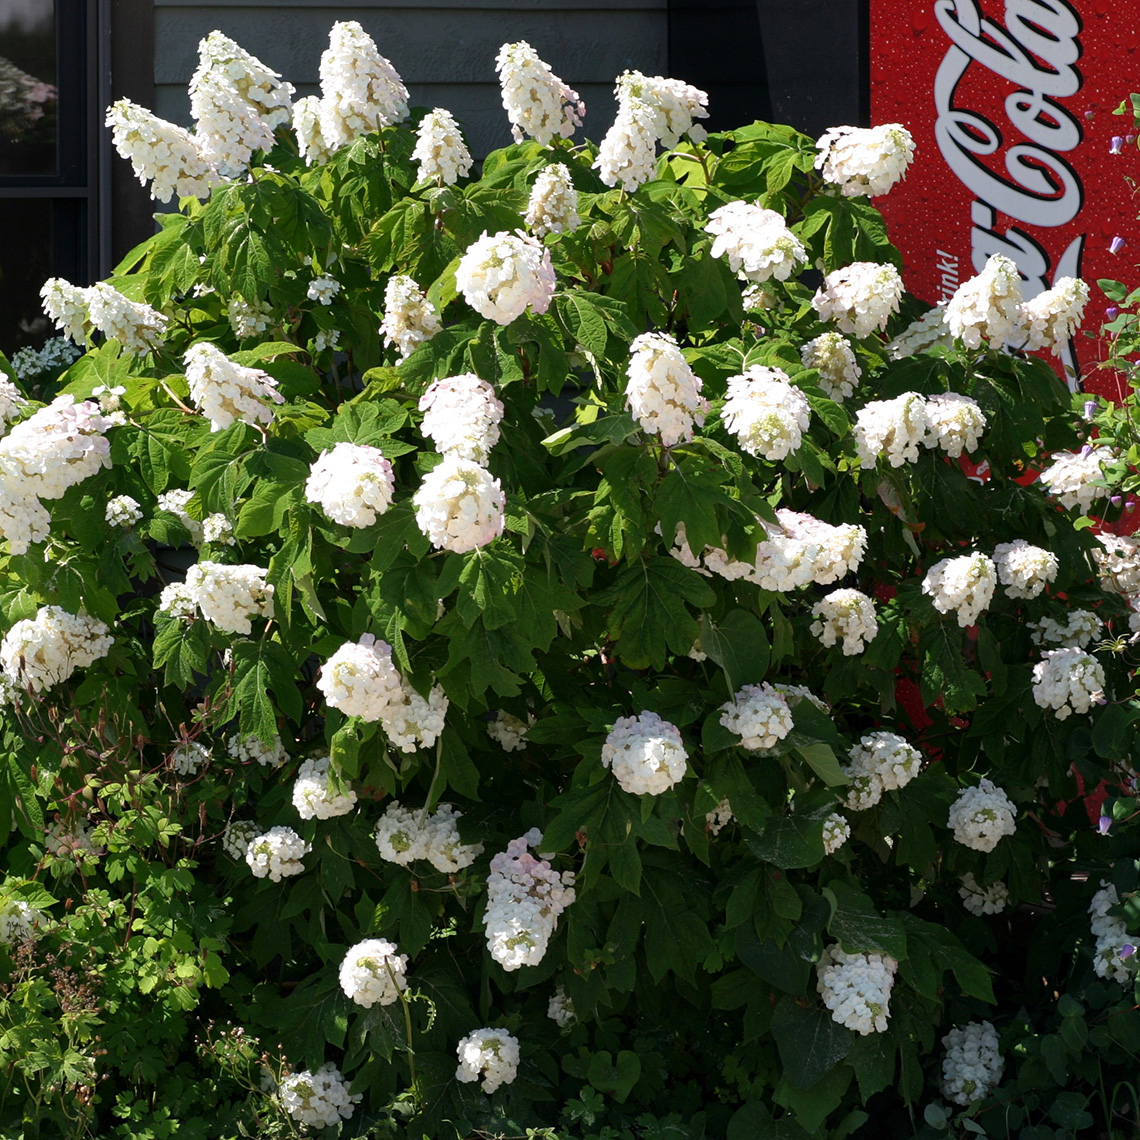 Gatsby Pink oakleaf hydrangea in full bloom with white flowers and a red coca cola machine behind it